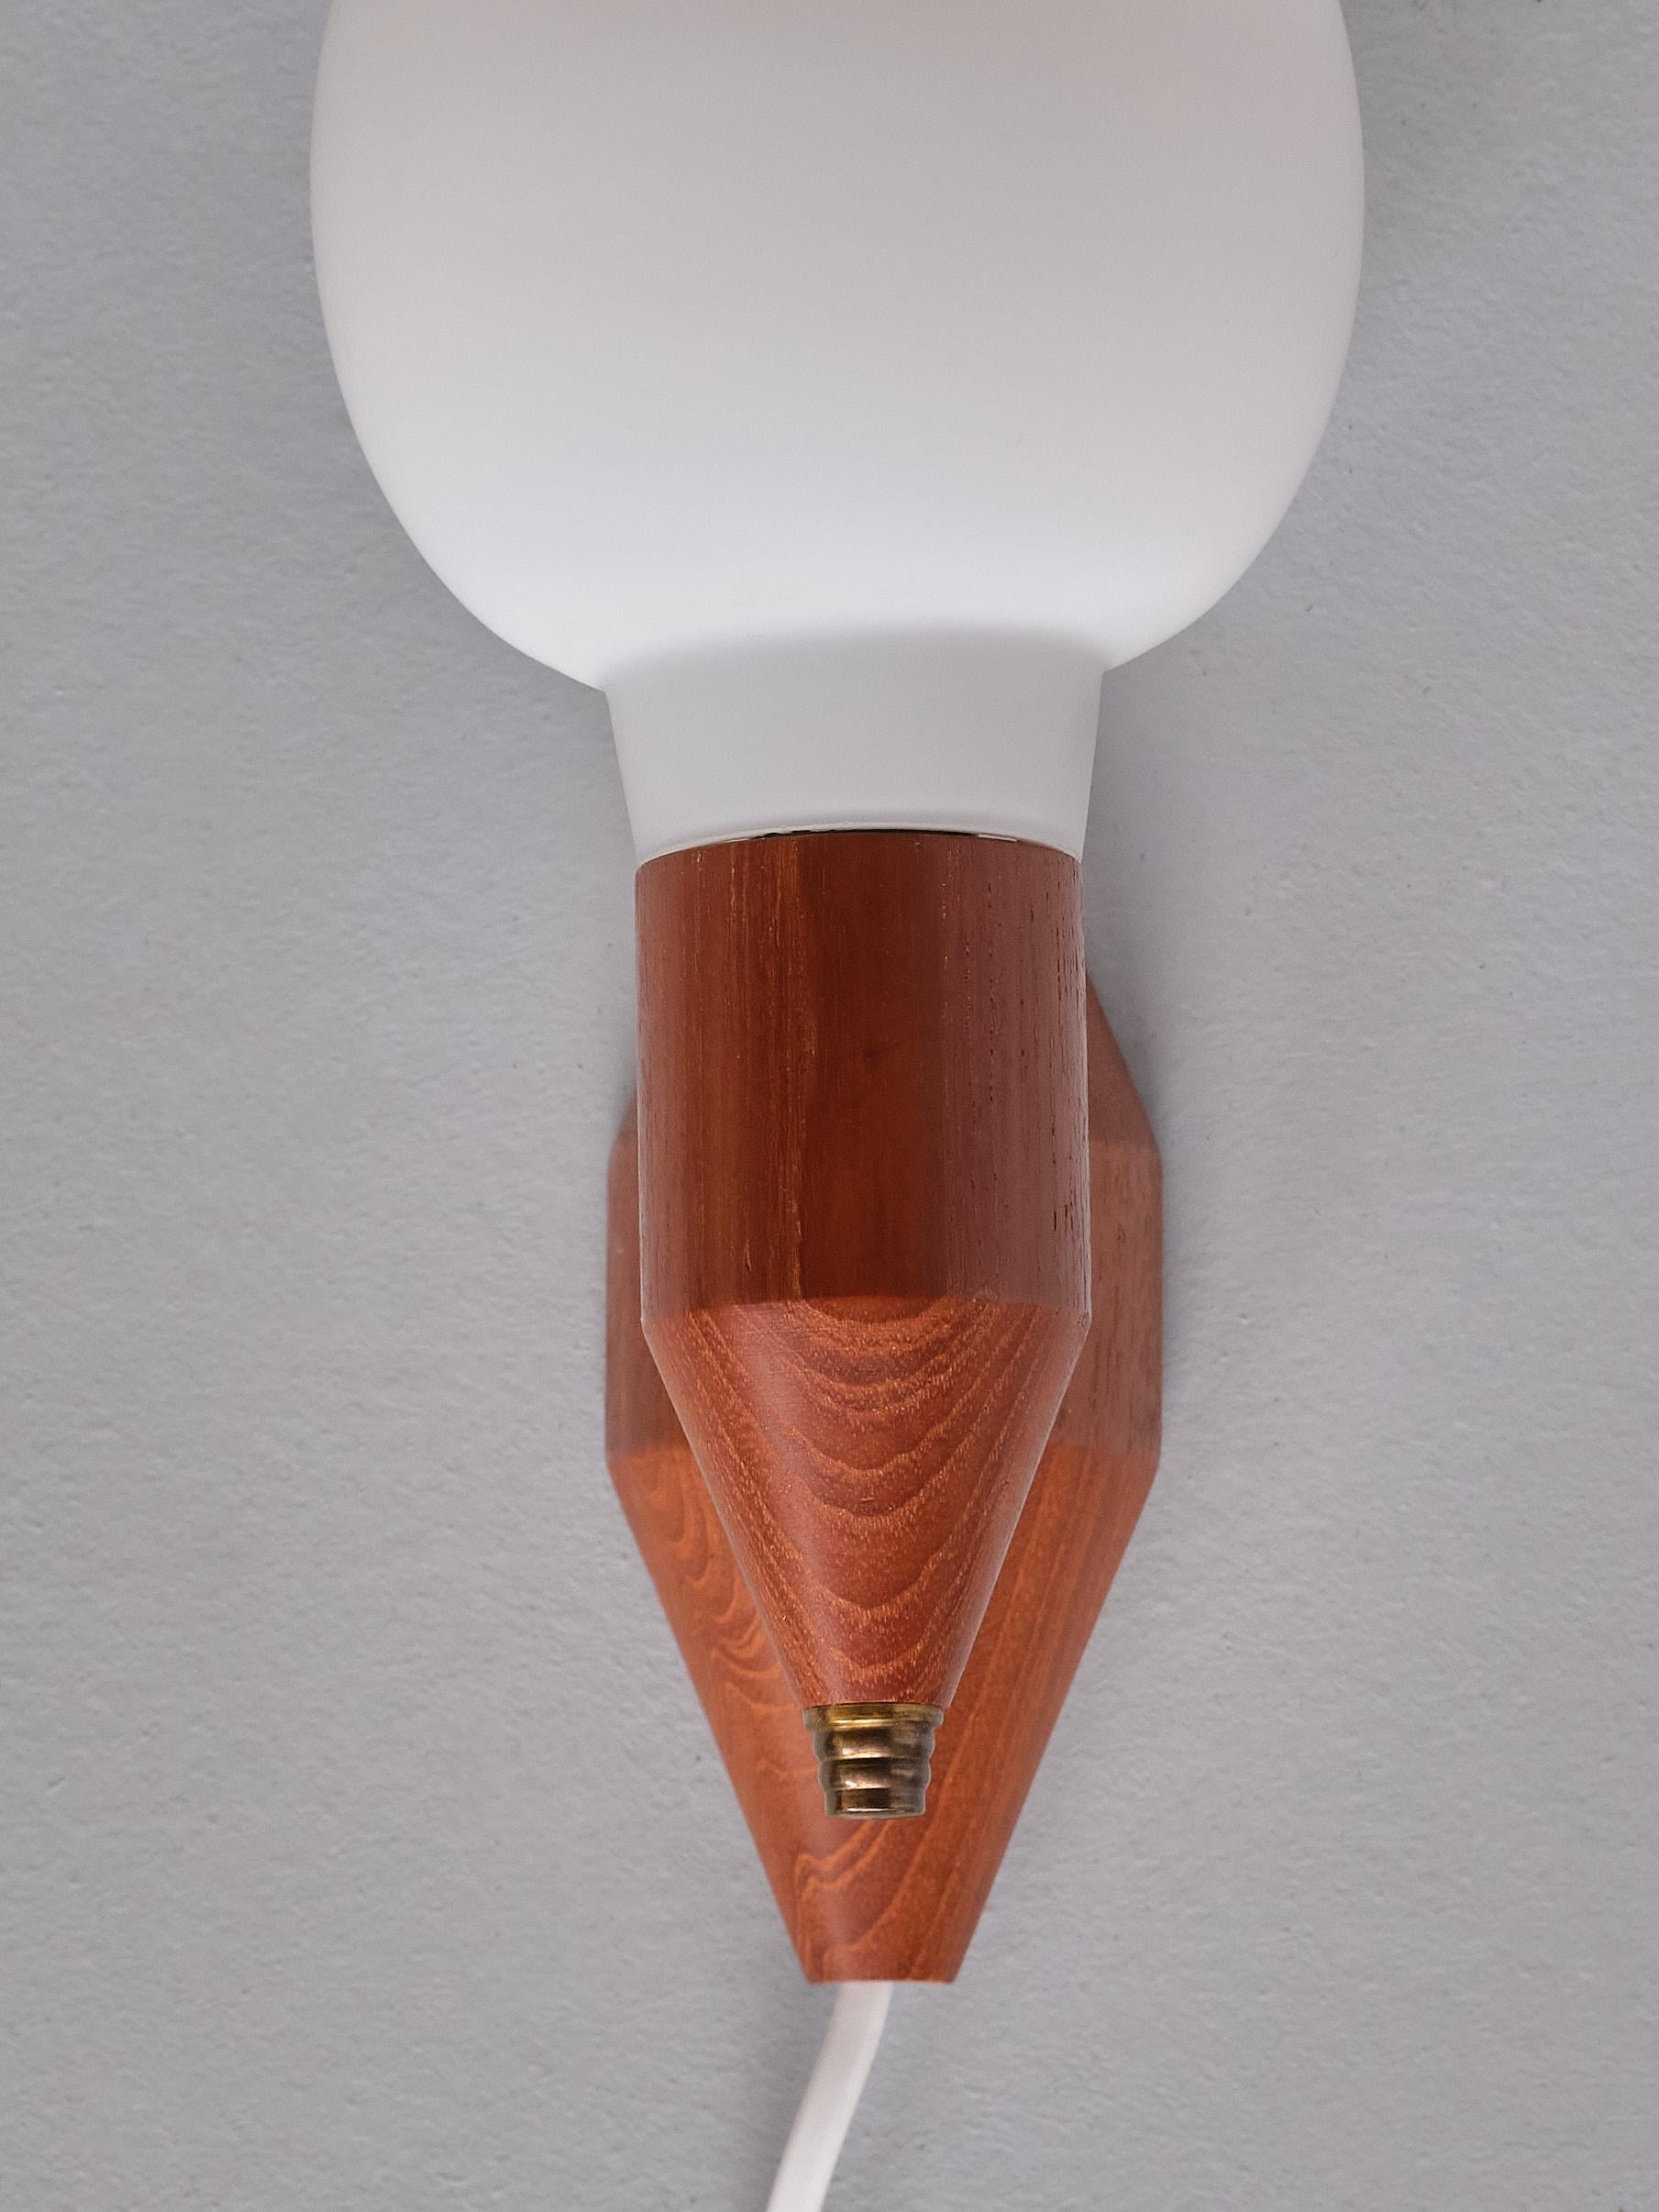 Swedish Modern Wall Lamps in Teak Wood, Brass and Opaline Glass, Sweden, 1950s For Sale 1